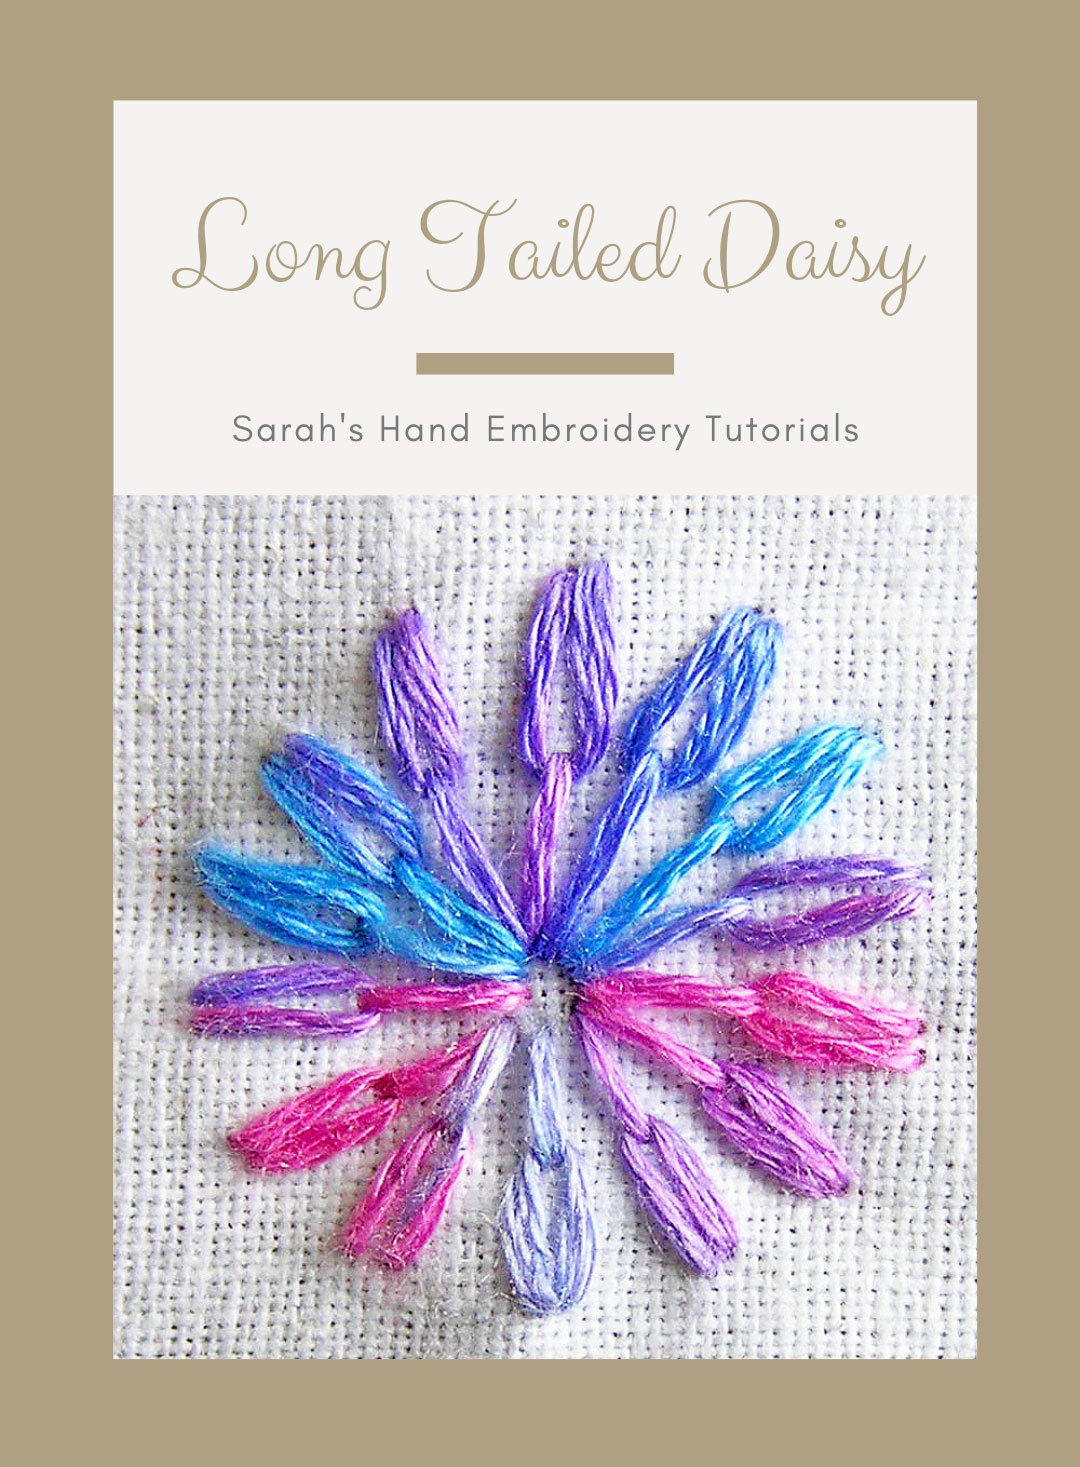 How To Do The Long Tailed Daisy Sarah S Hand Embroidery Tutorials